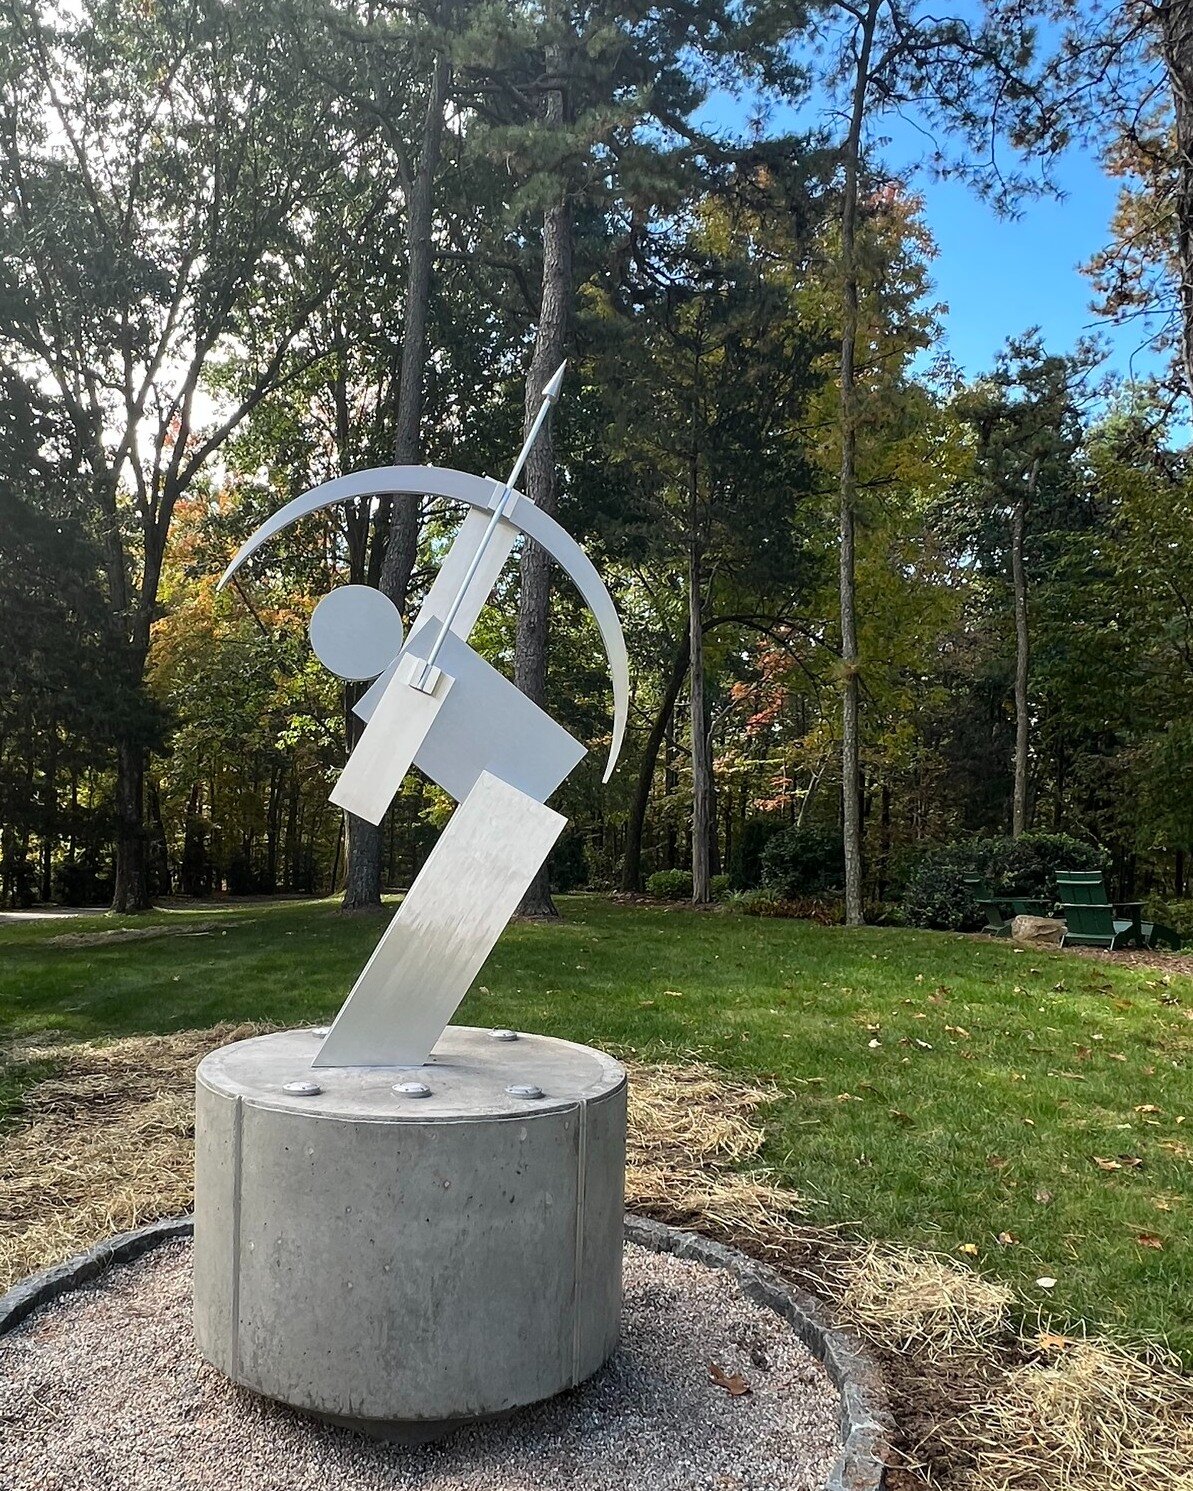 Bill Knight
𝙏𝙤 𝘿𝙖𝙧𝙚 𝙞𝙨 𝙩𝙤 𝘿𝙤
2023
79 x 46 x 7.5 inches
solid aluminum

Fabricated by VAF in 2023.